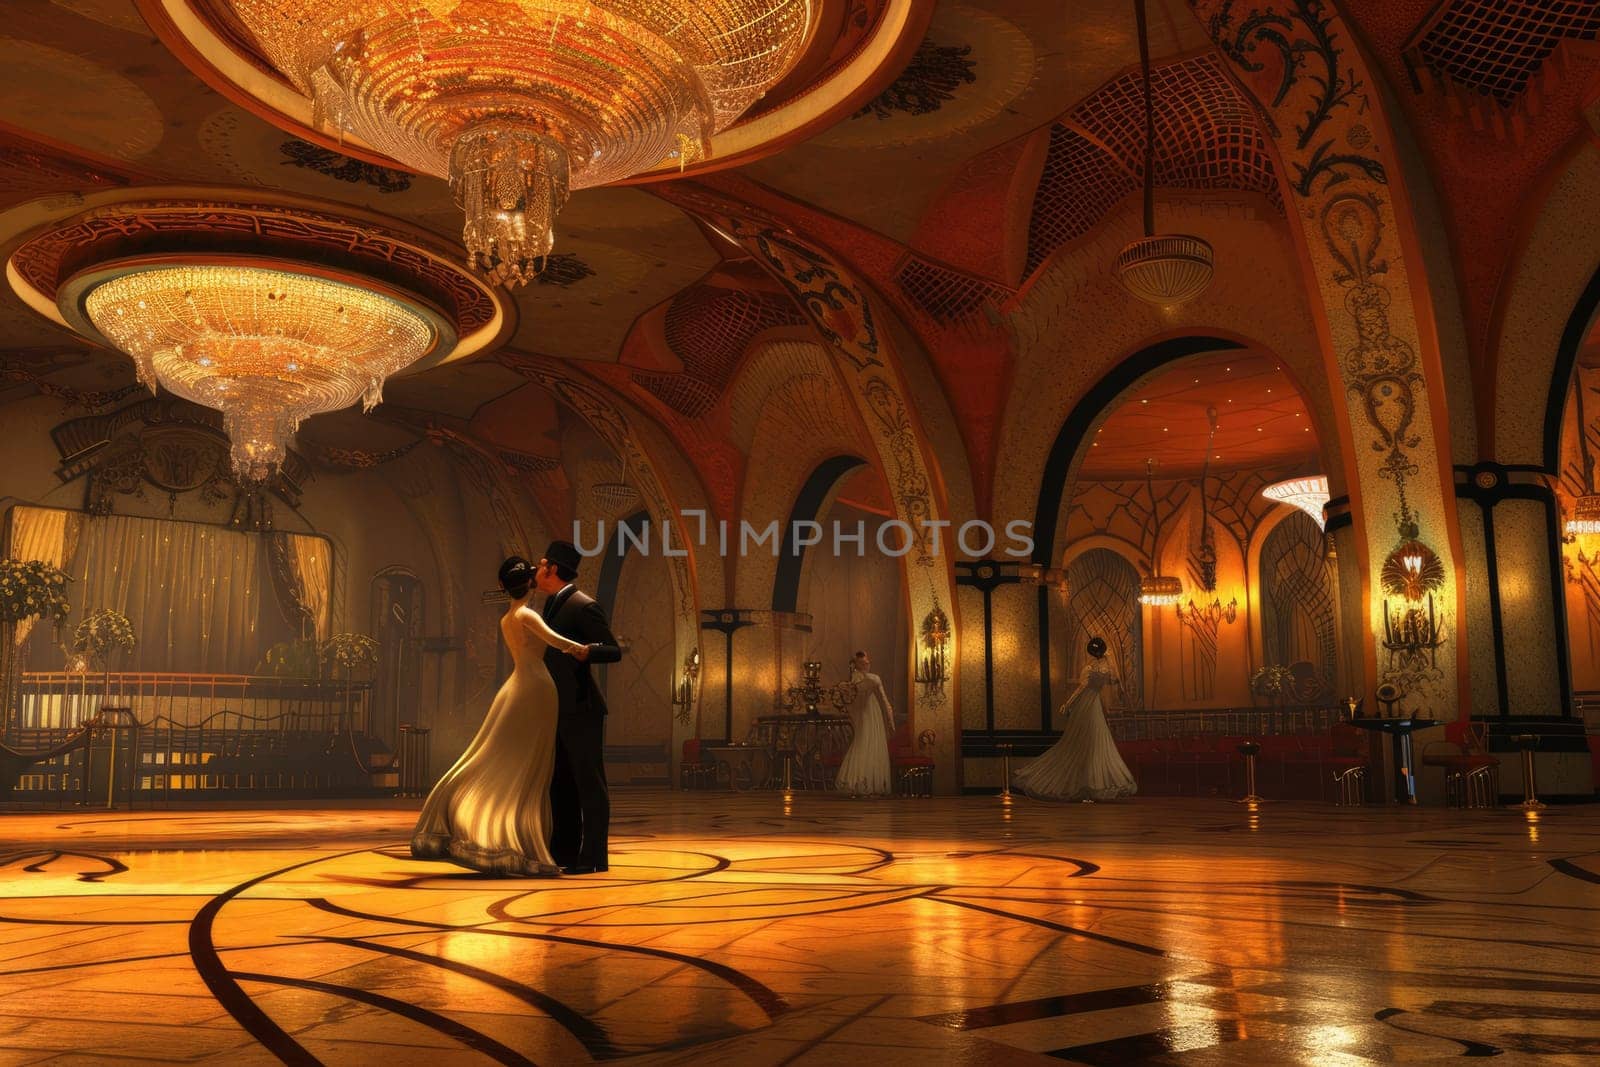 An art deco inspired ballroom from the 1920s, with elegant dancers. Resplendent. by biancoblue